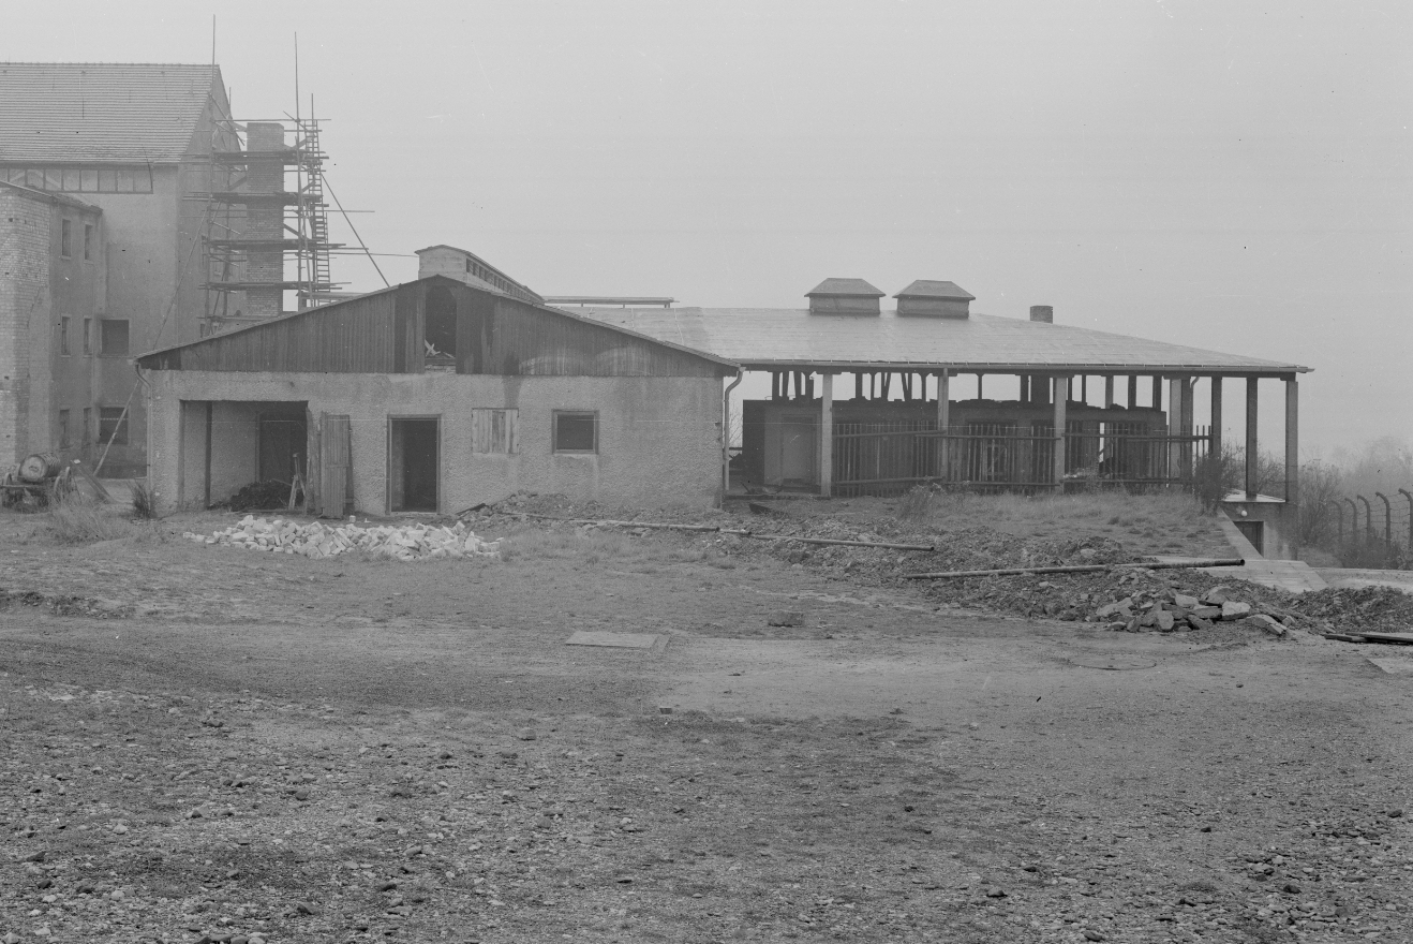 The front view of the disinfection building can be seen. The flat building is open. The chimney is scaffolded and is being dismantled. The right part of the building has no exterior walls at the time of the photo.